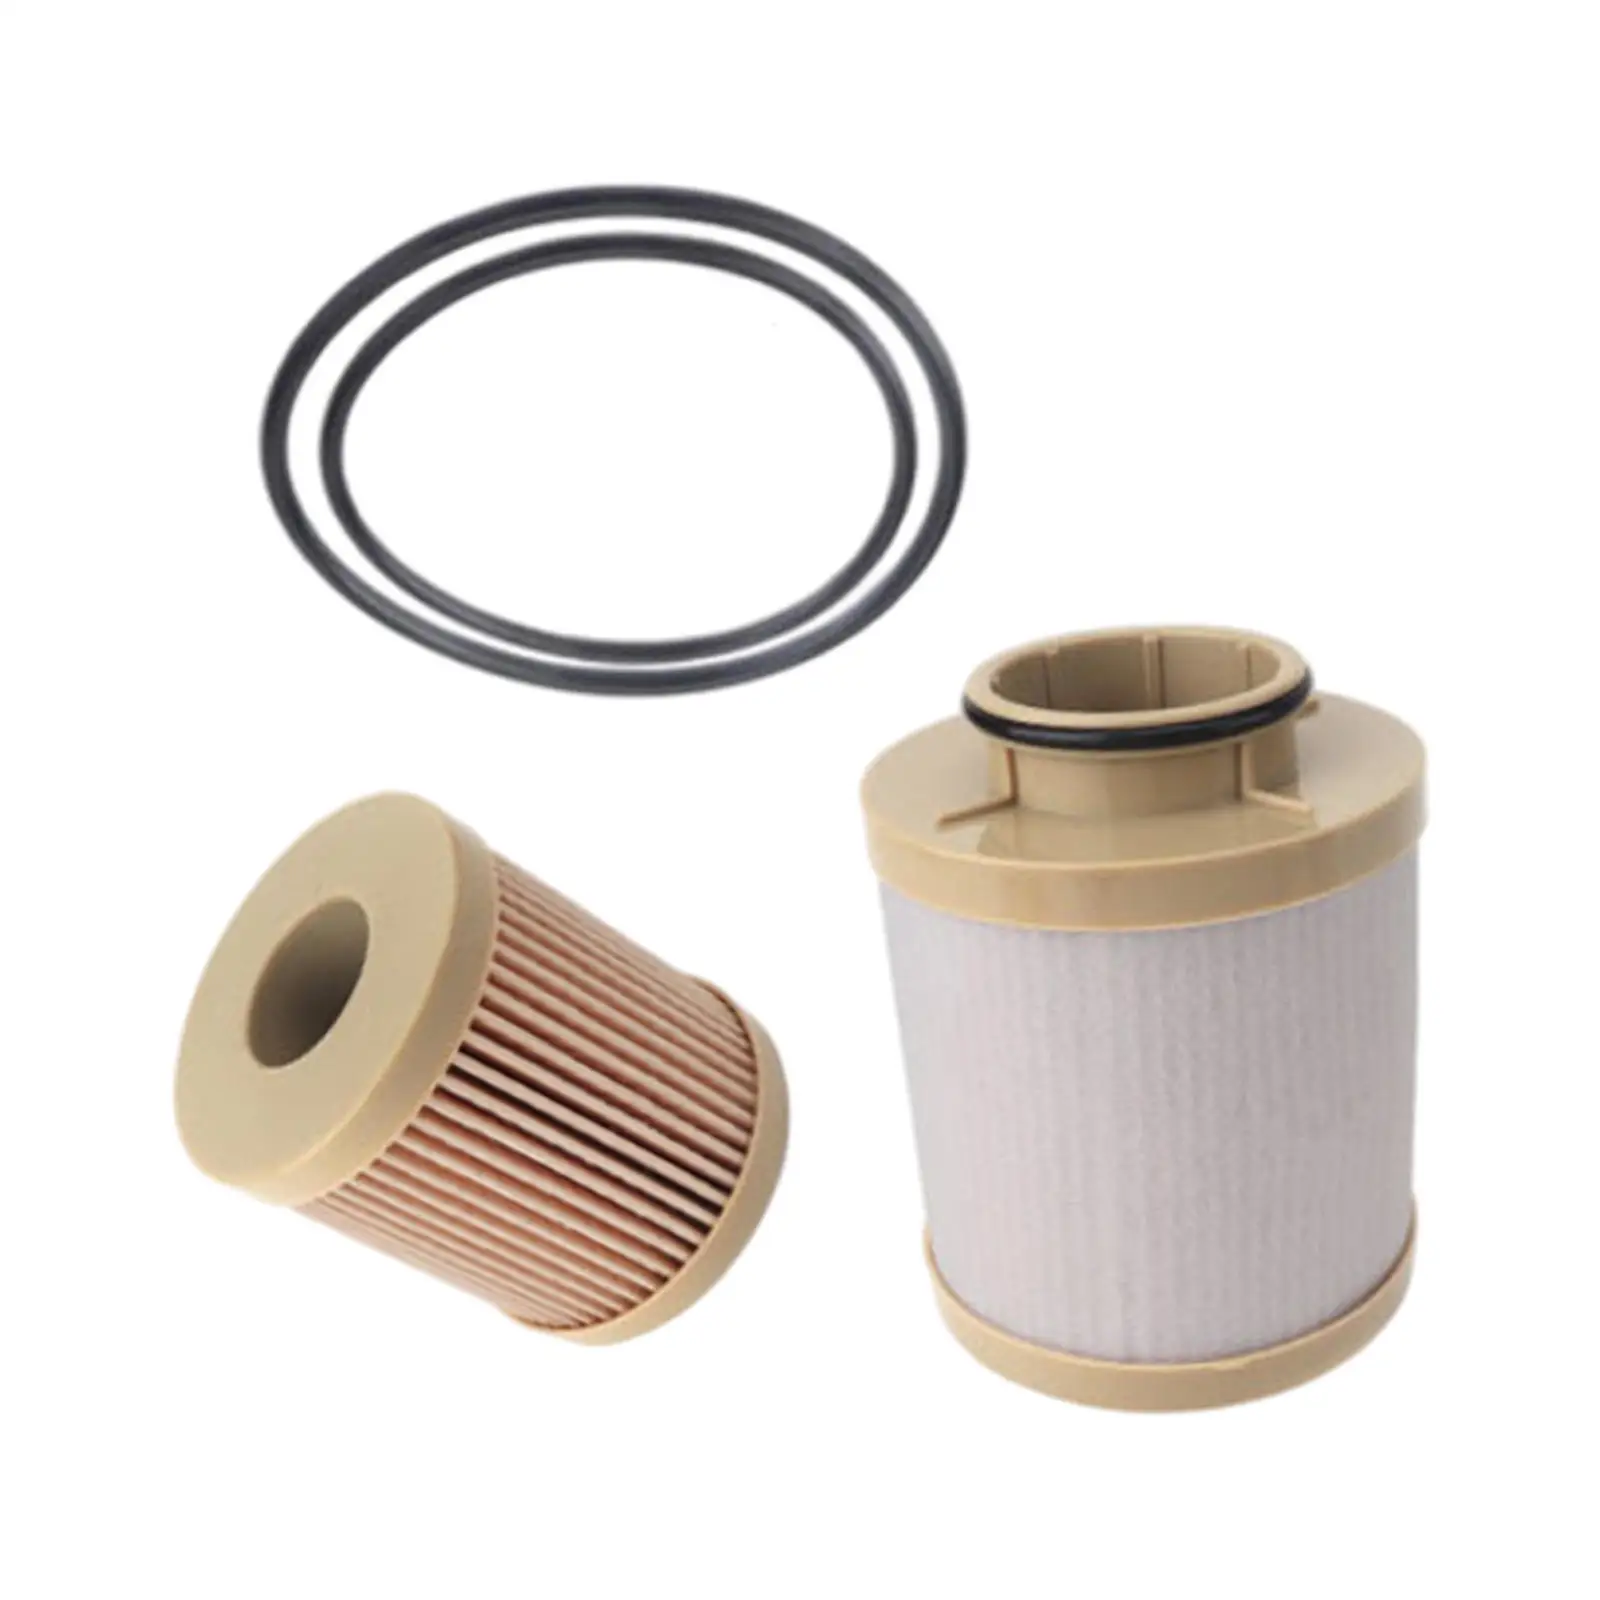 Fuel Filters 6.0L Powerstroke Turbo FD4616 Fit for Ford F450 Truck 2008-2010 Direct Replaces Spare Parts Professional